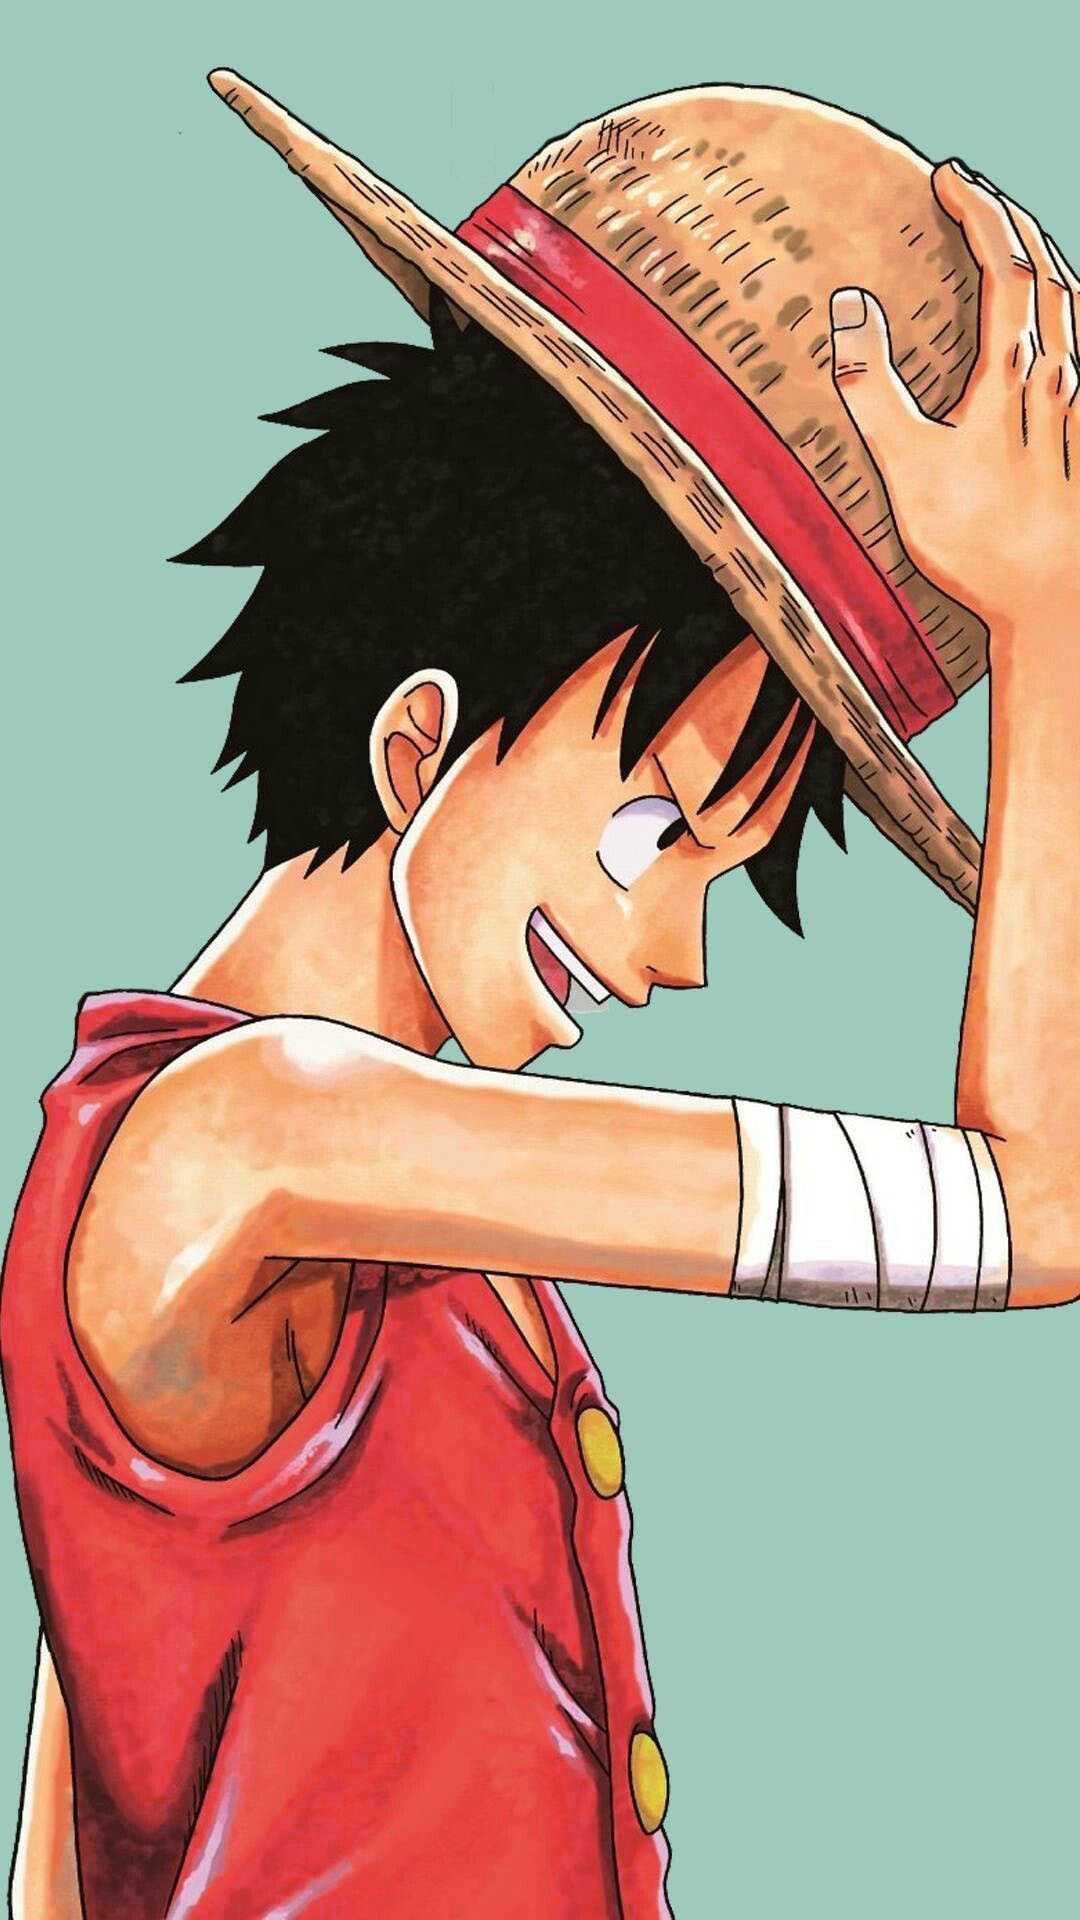 Luffy Wallpaper Browse Luffy Wallpaper with collections of Android, Angry, Chibi, Epic, iPhone. /l. Luffy, Anime, Monkey d. luffy wallpaper